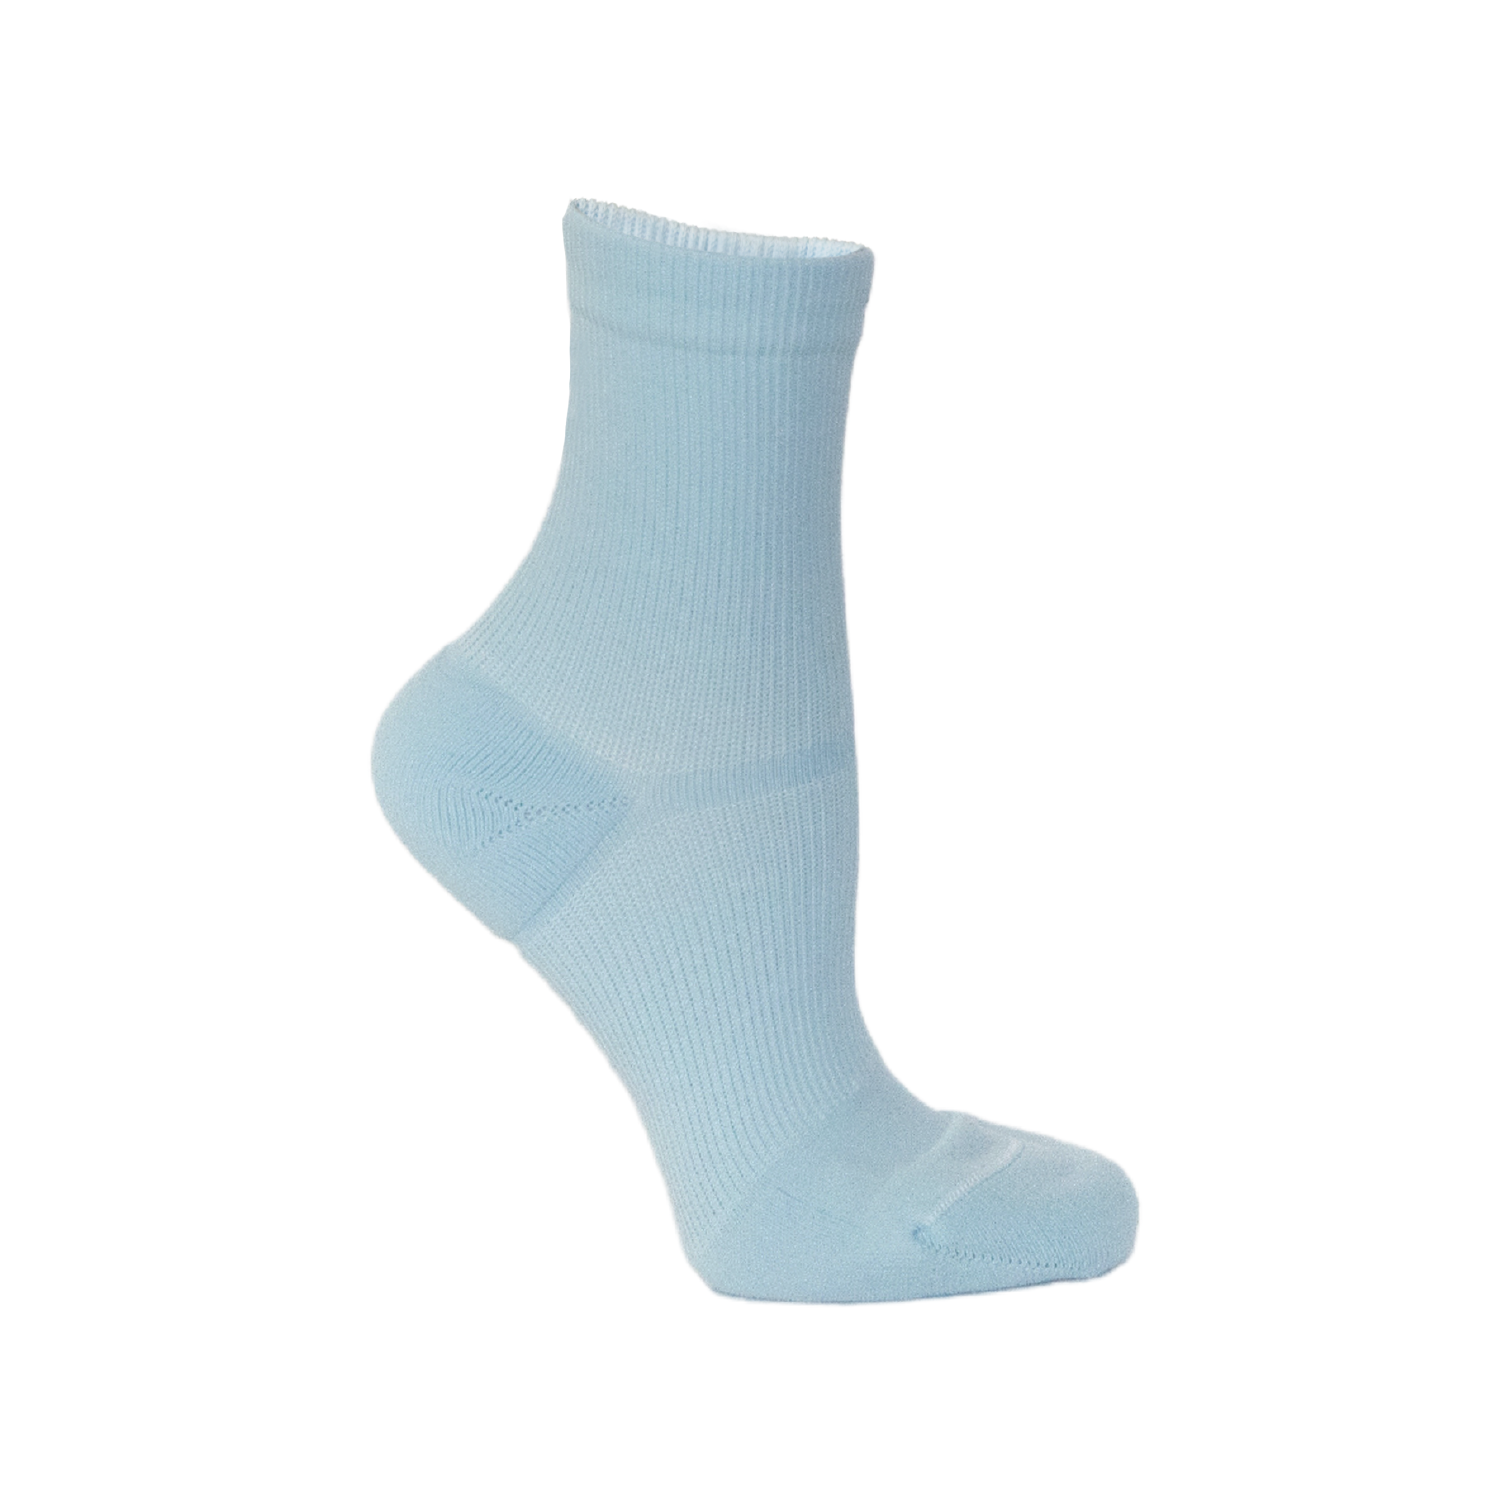 Apolla Performance Socks with Traction